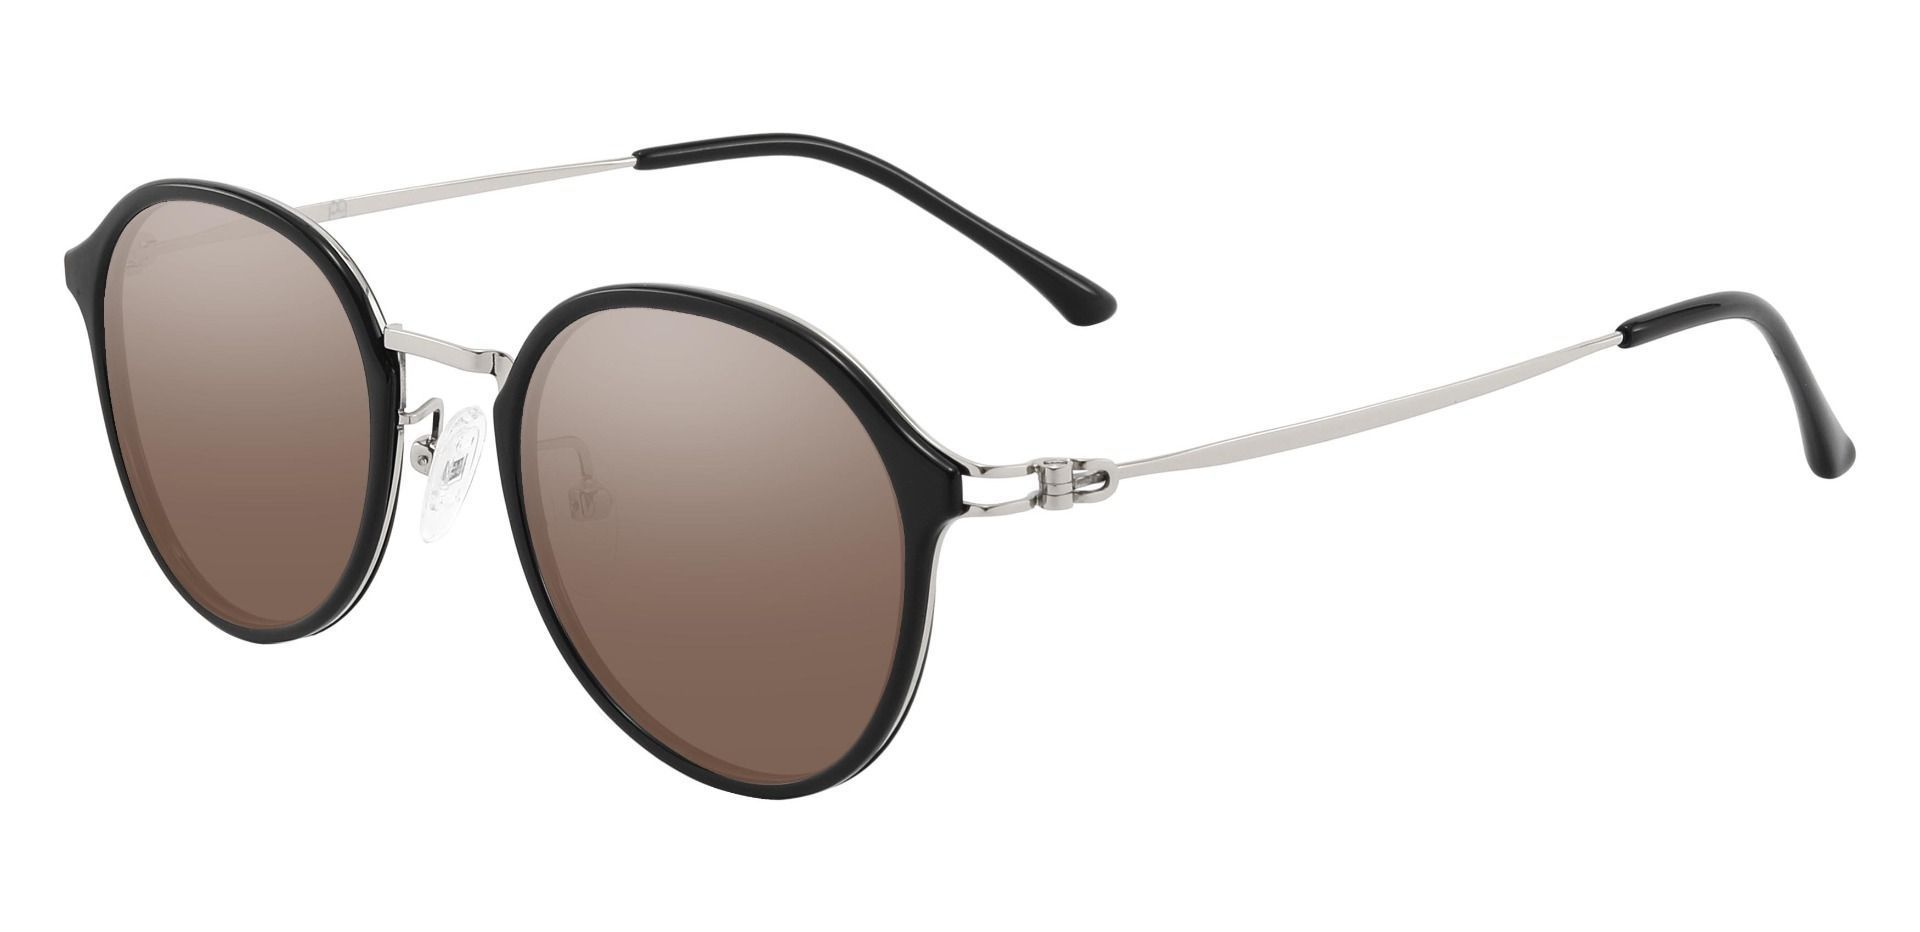 Billings Round Non-Rx Sunglasses - Black Frame With Brown Lenses